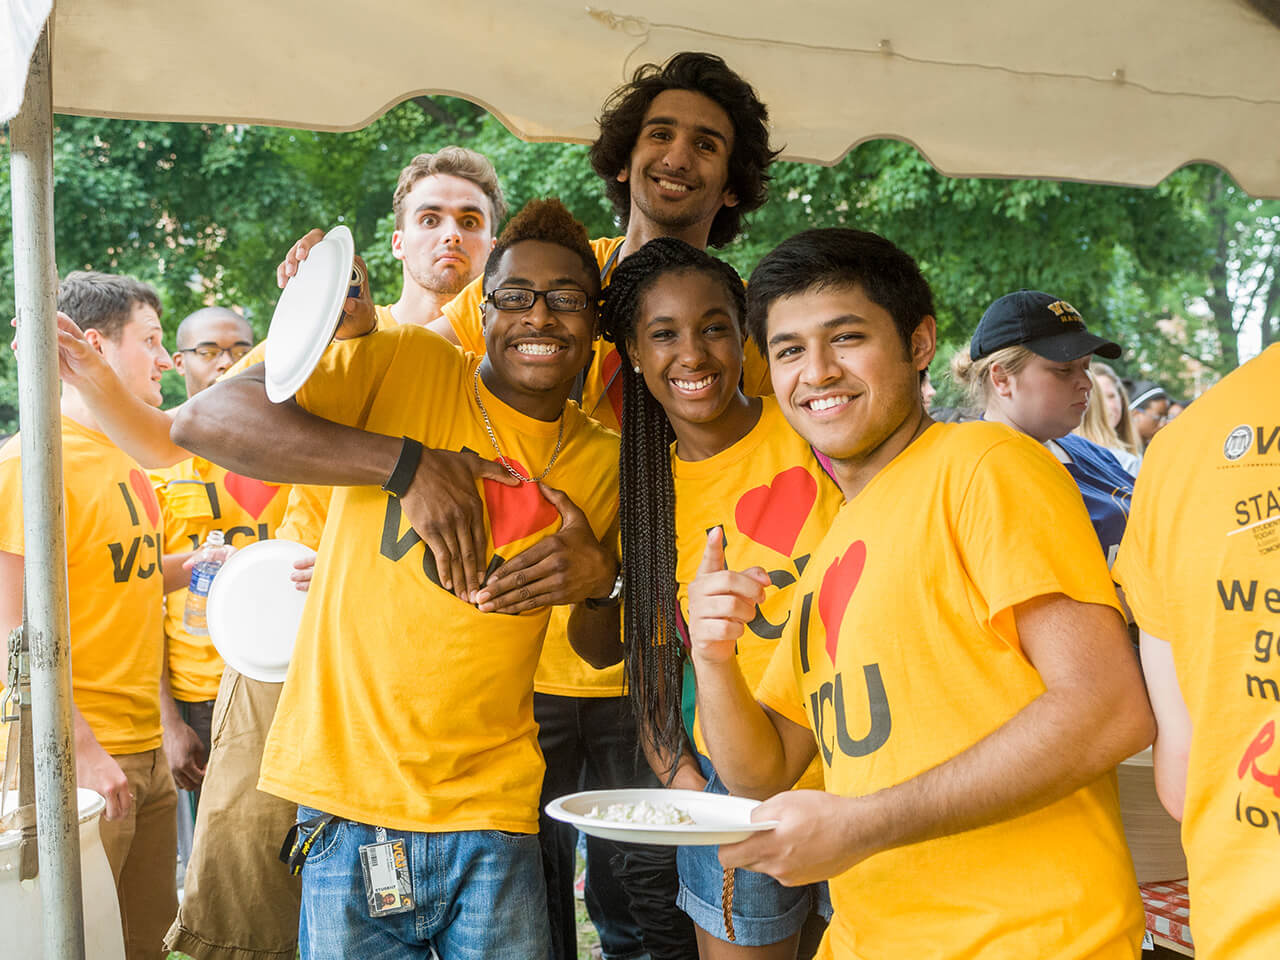 Students in a large group wearing I love VCU tshirts